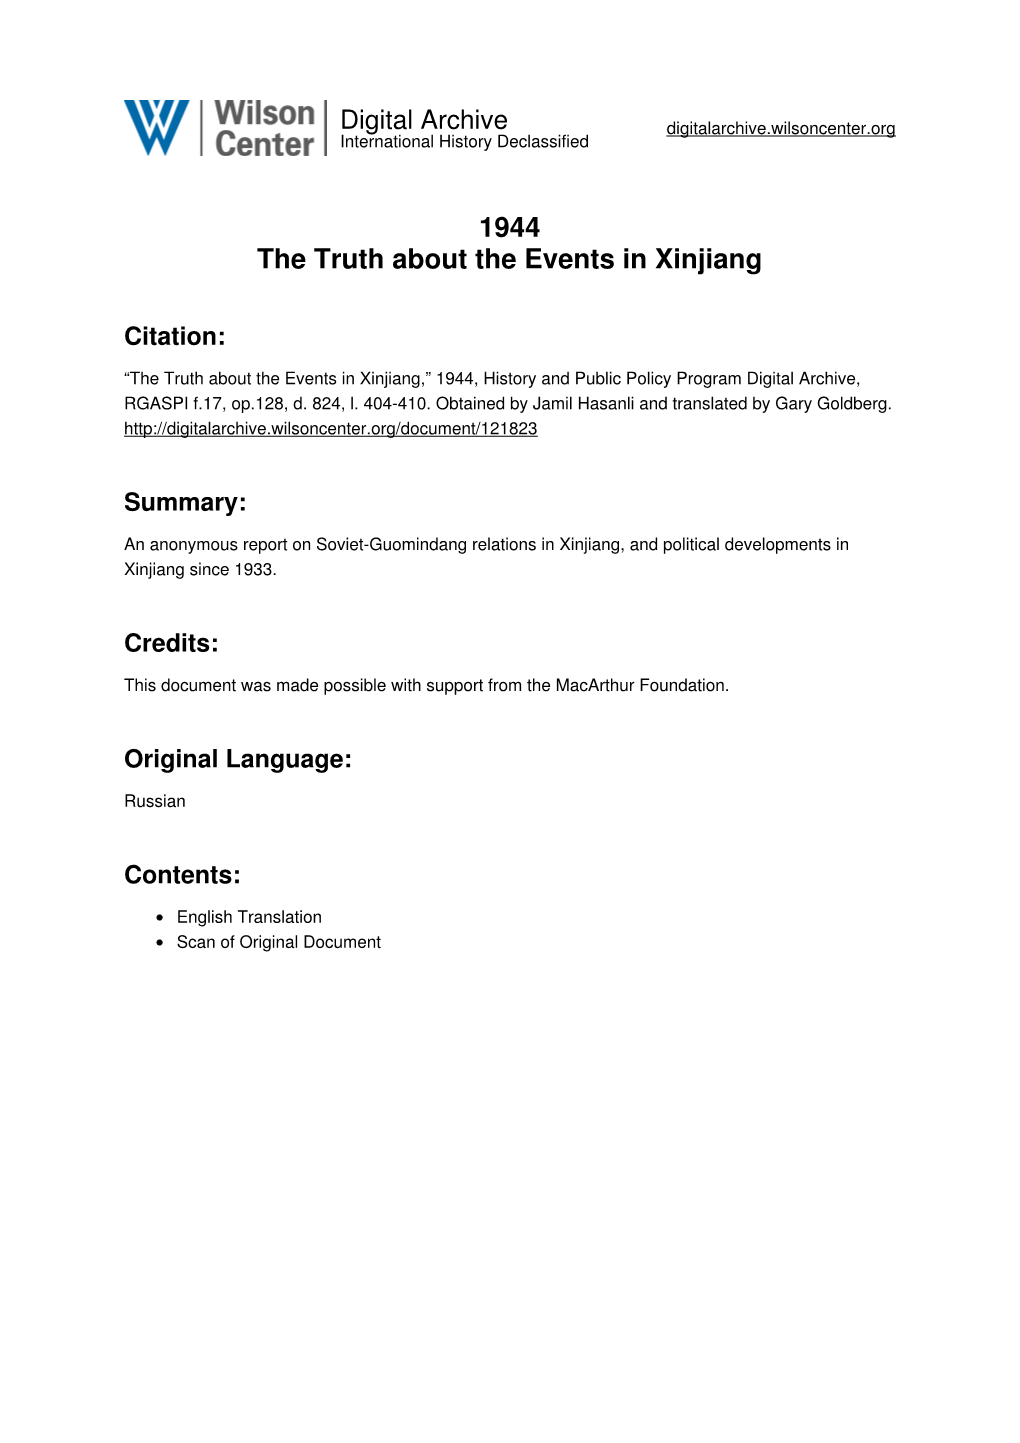 1944 the Truth About the Events in Xinjiang